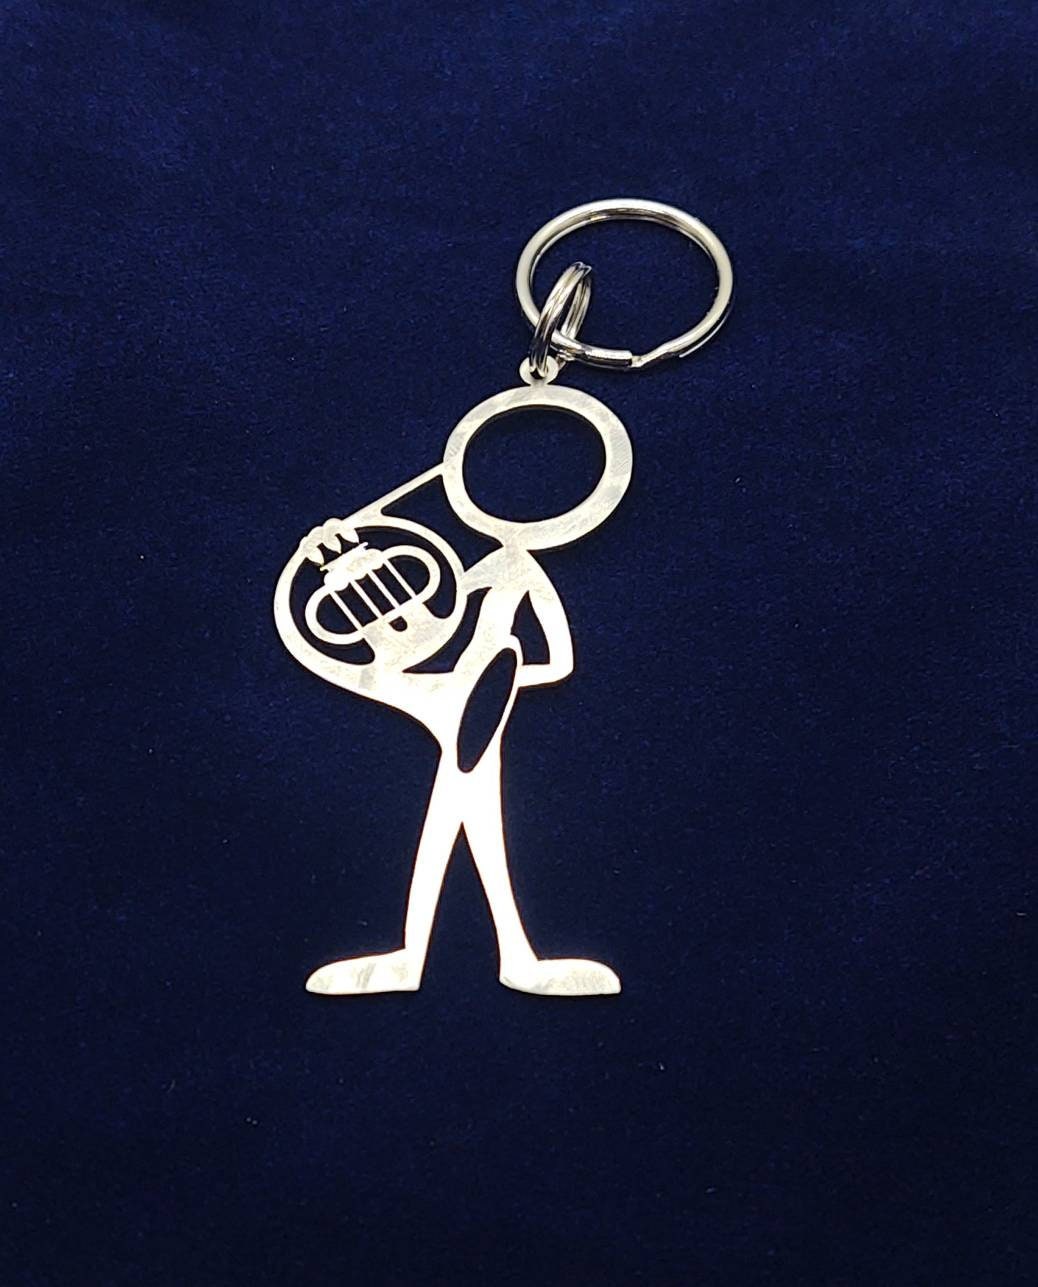 Female Drummer Stick Figure Key Chain Charm for the Rock and Roll Band  Member,music Lover or Christmas Ornament 